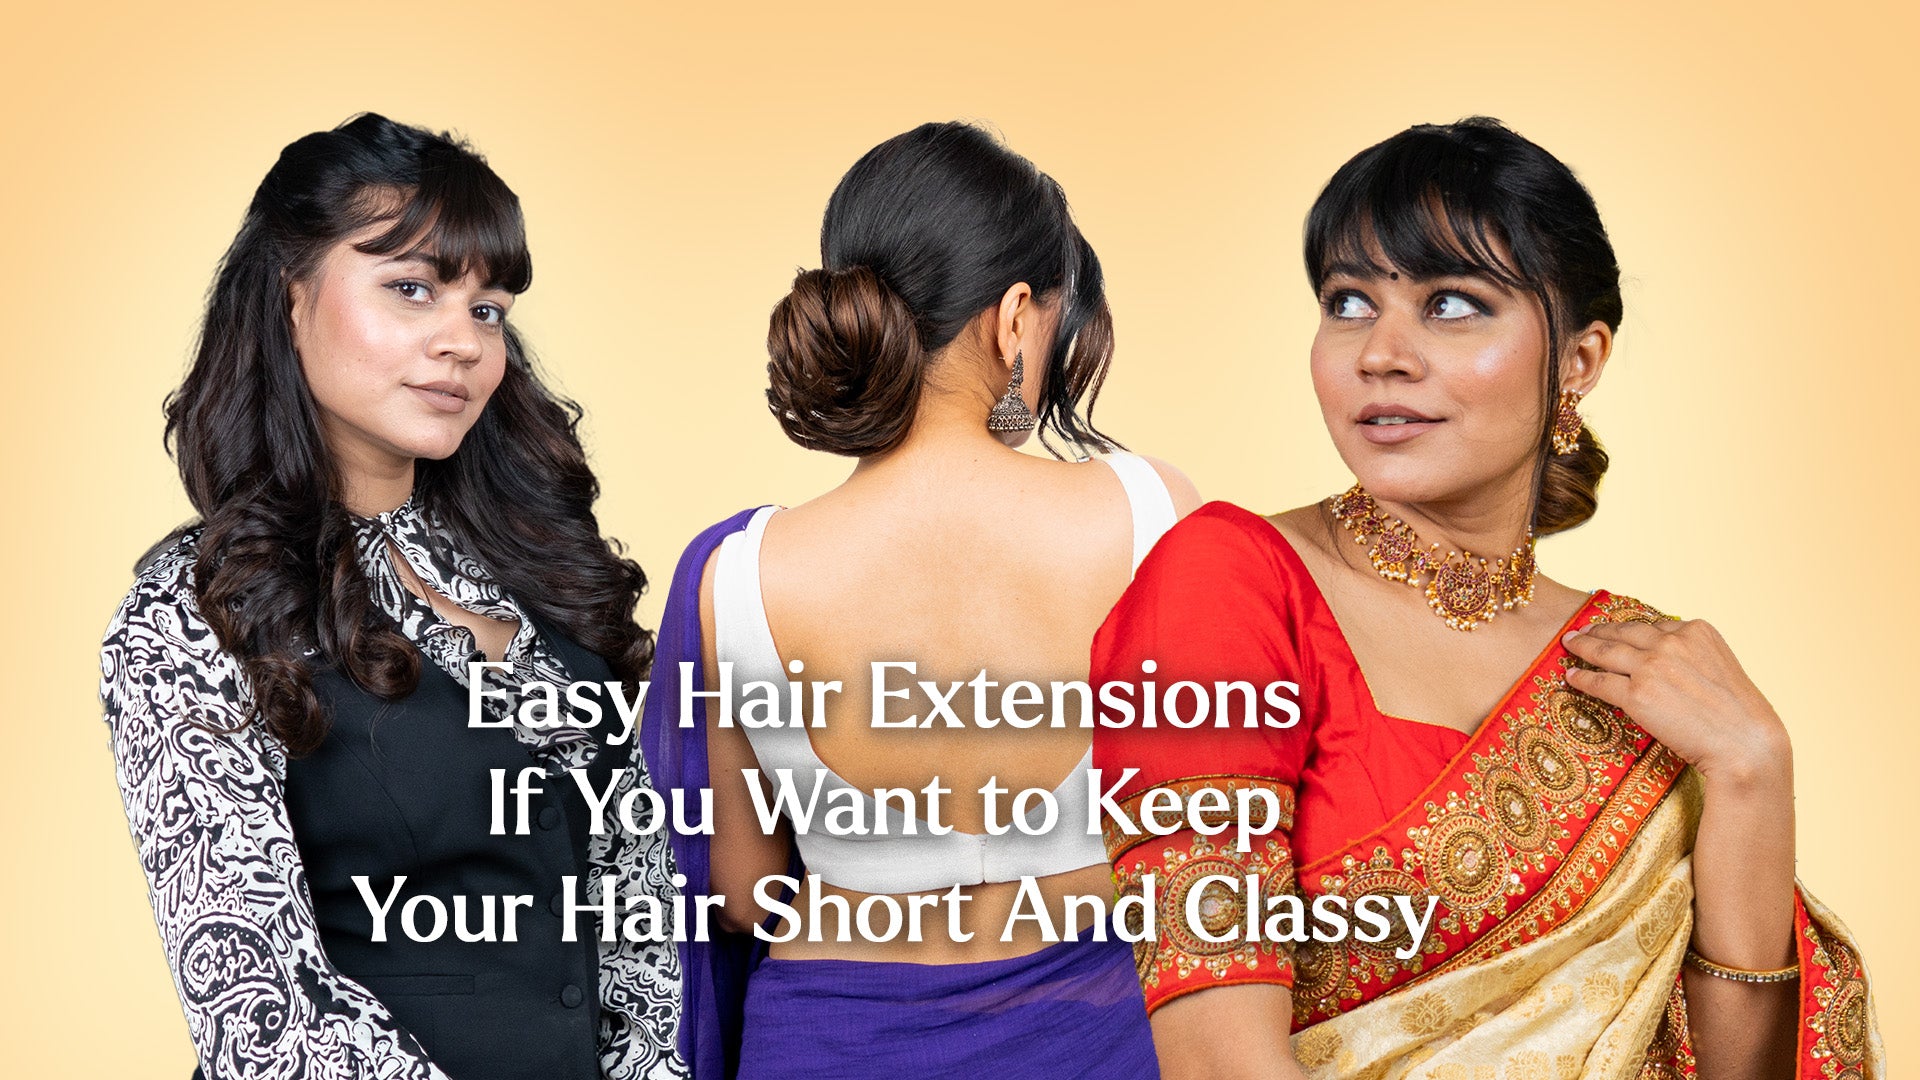 Easy Hair Extensions If You Want to Keep Your Hair Short And Classy